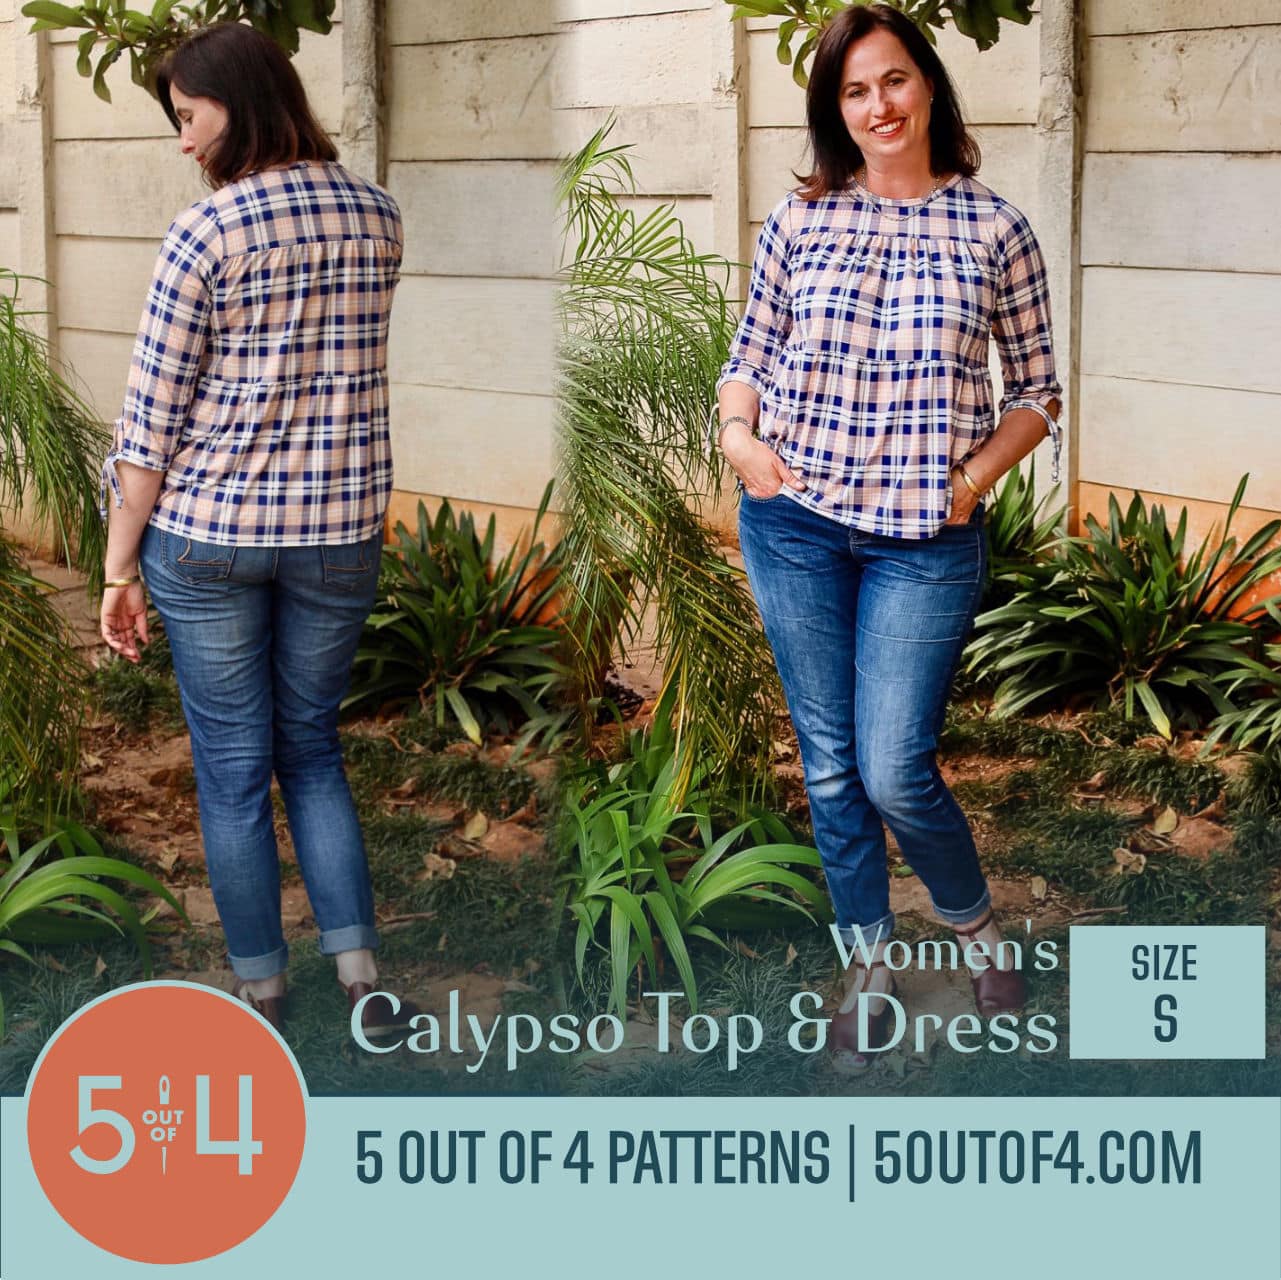 Calypso Top and Dress - 5 out of 4 Patterns